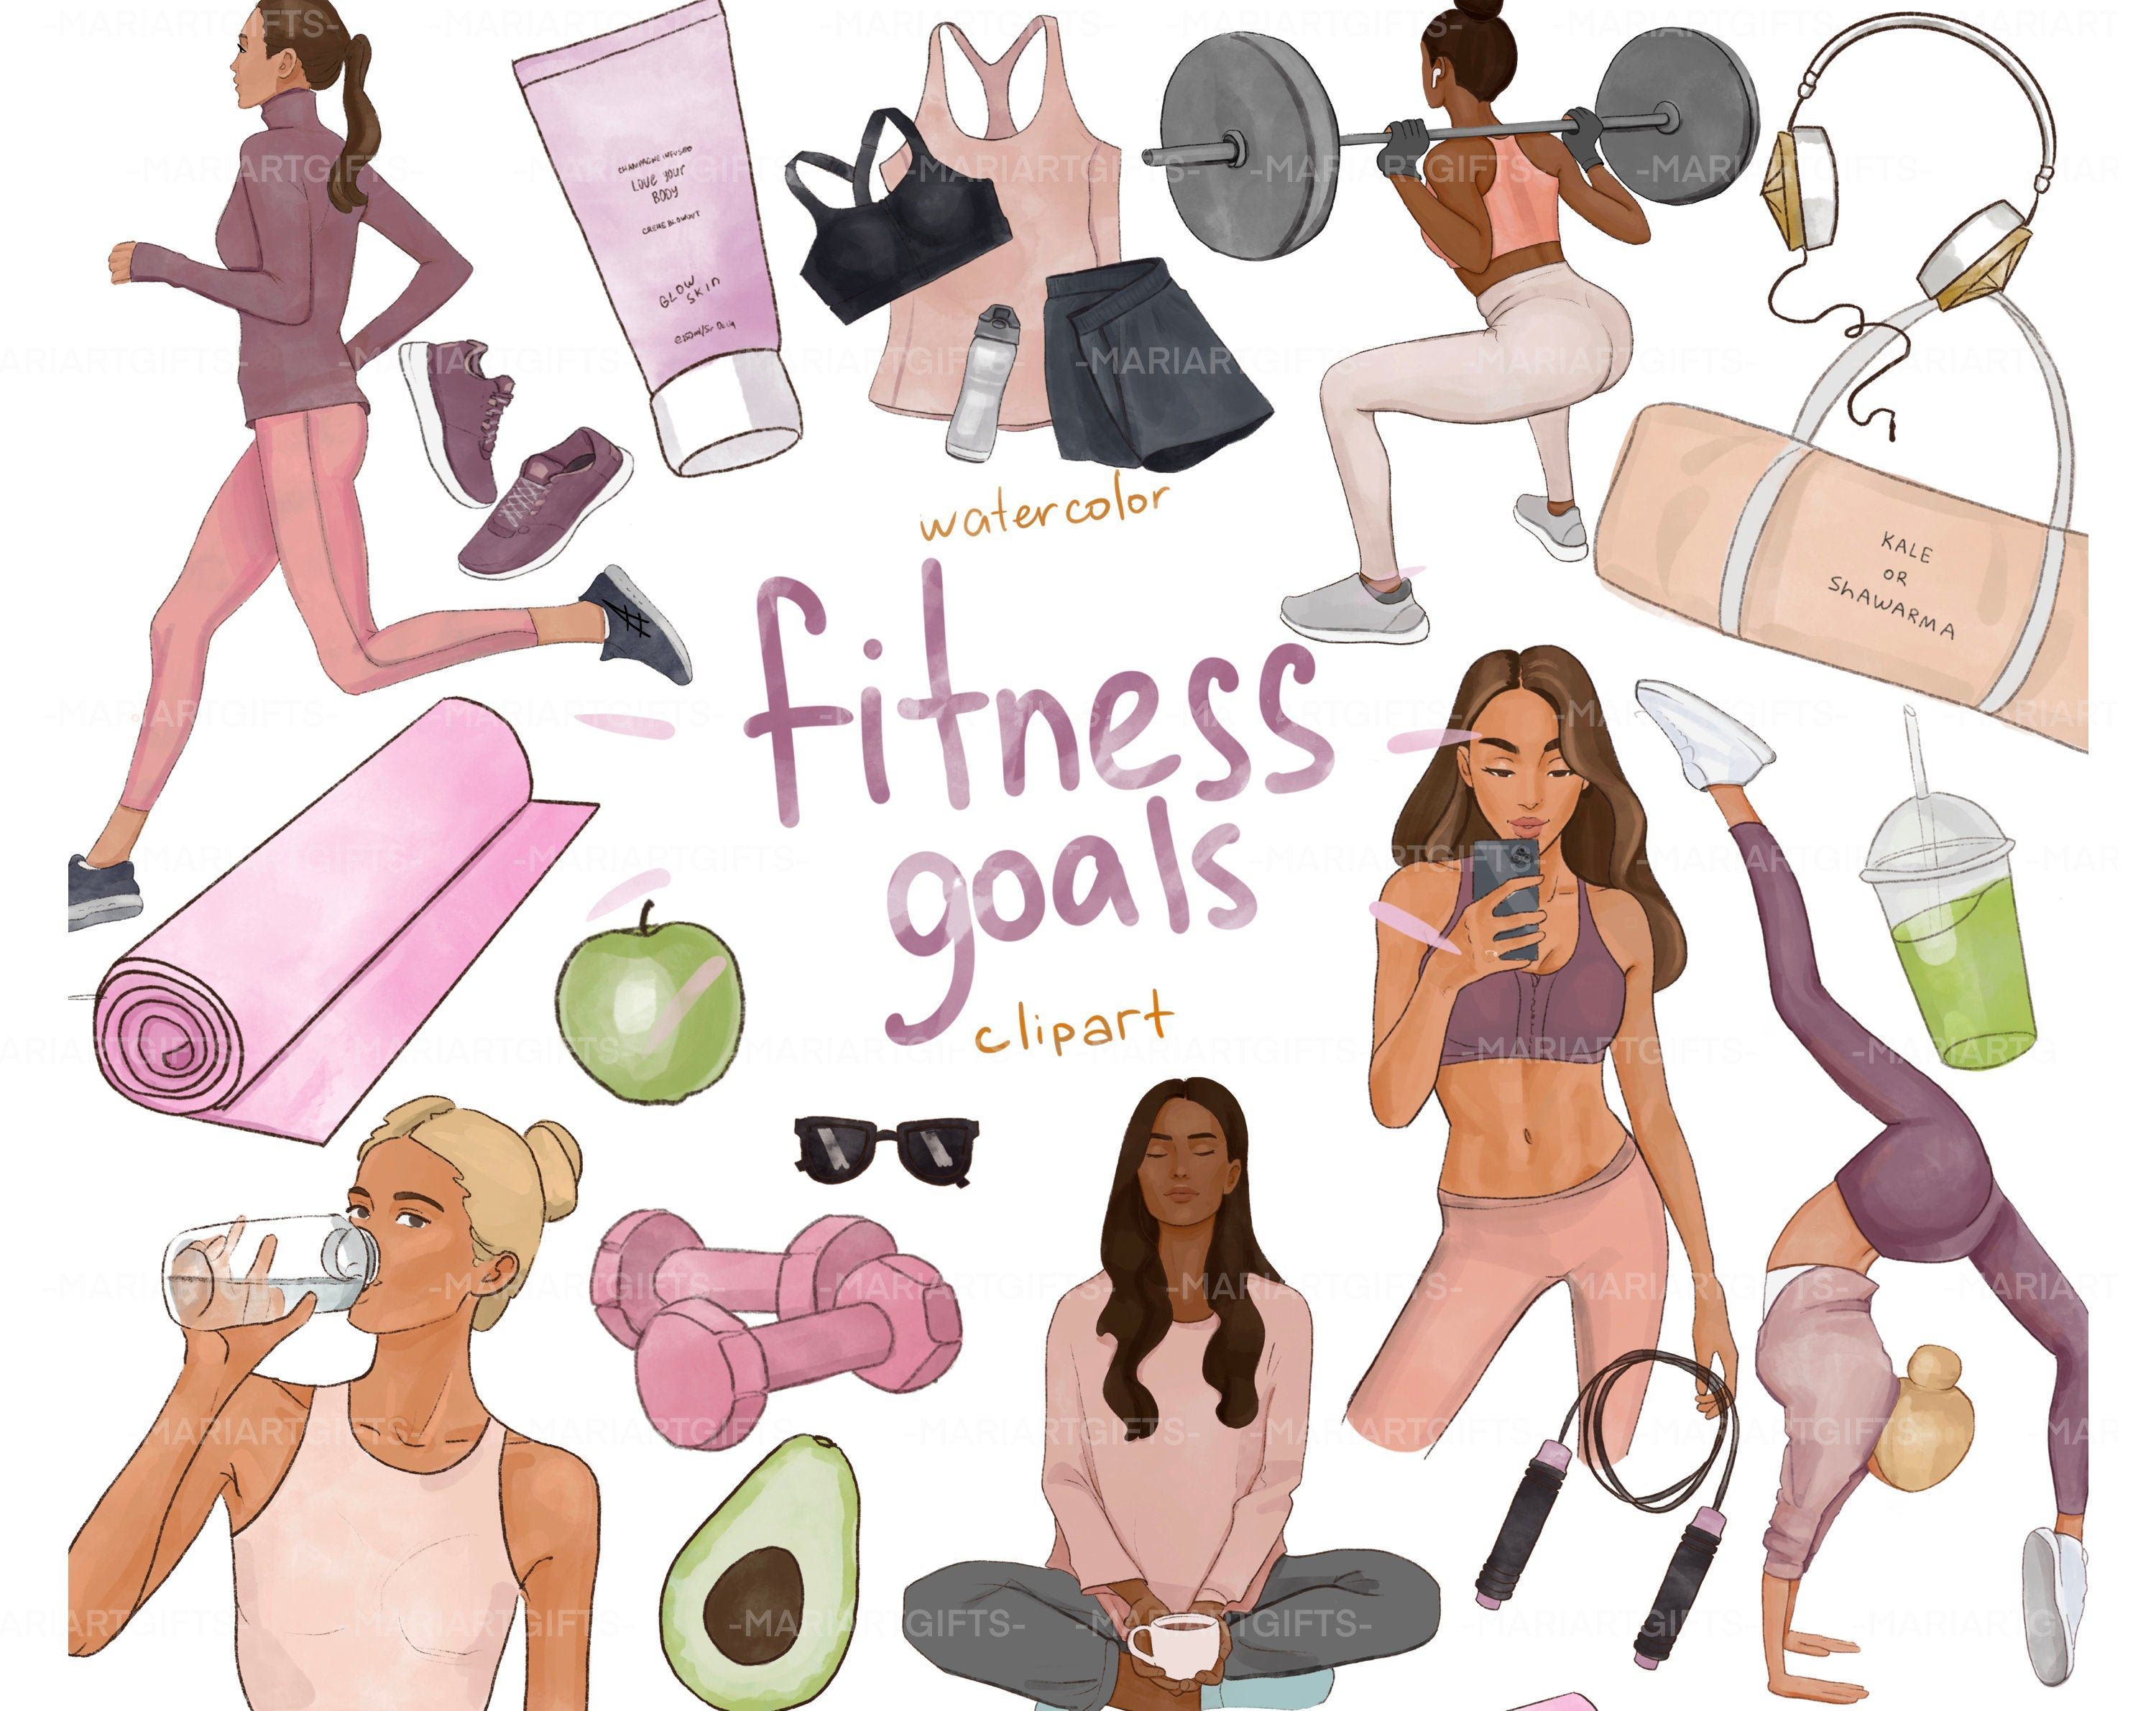 Fitness Clipart, Workout Clip Art, Yoga Clip Art, Fashion Illustration, Gym Equipment, gym clipart, fitness blogger, planner stickers - Fitness Clipart, Workout Clip Art, Yoga Clip Art, Fashion Illustration, Gym Equipment, gym clipart, fitness blogger, planner stickers -   15 fitness Art poster ideas